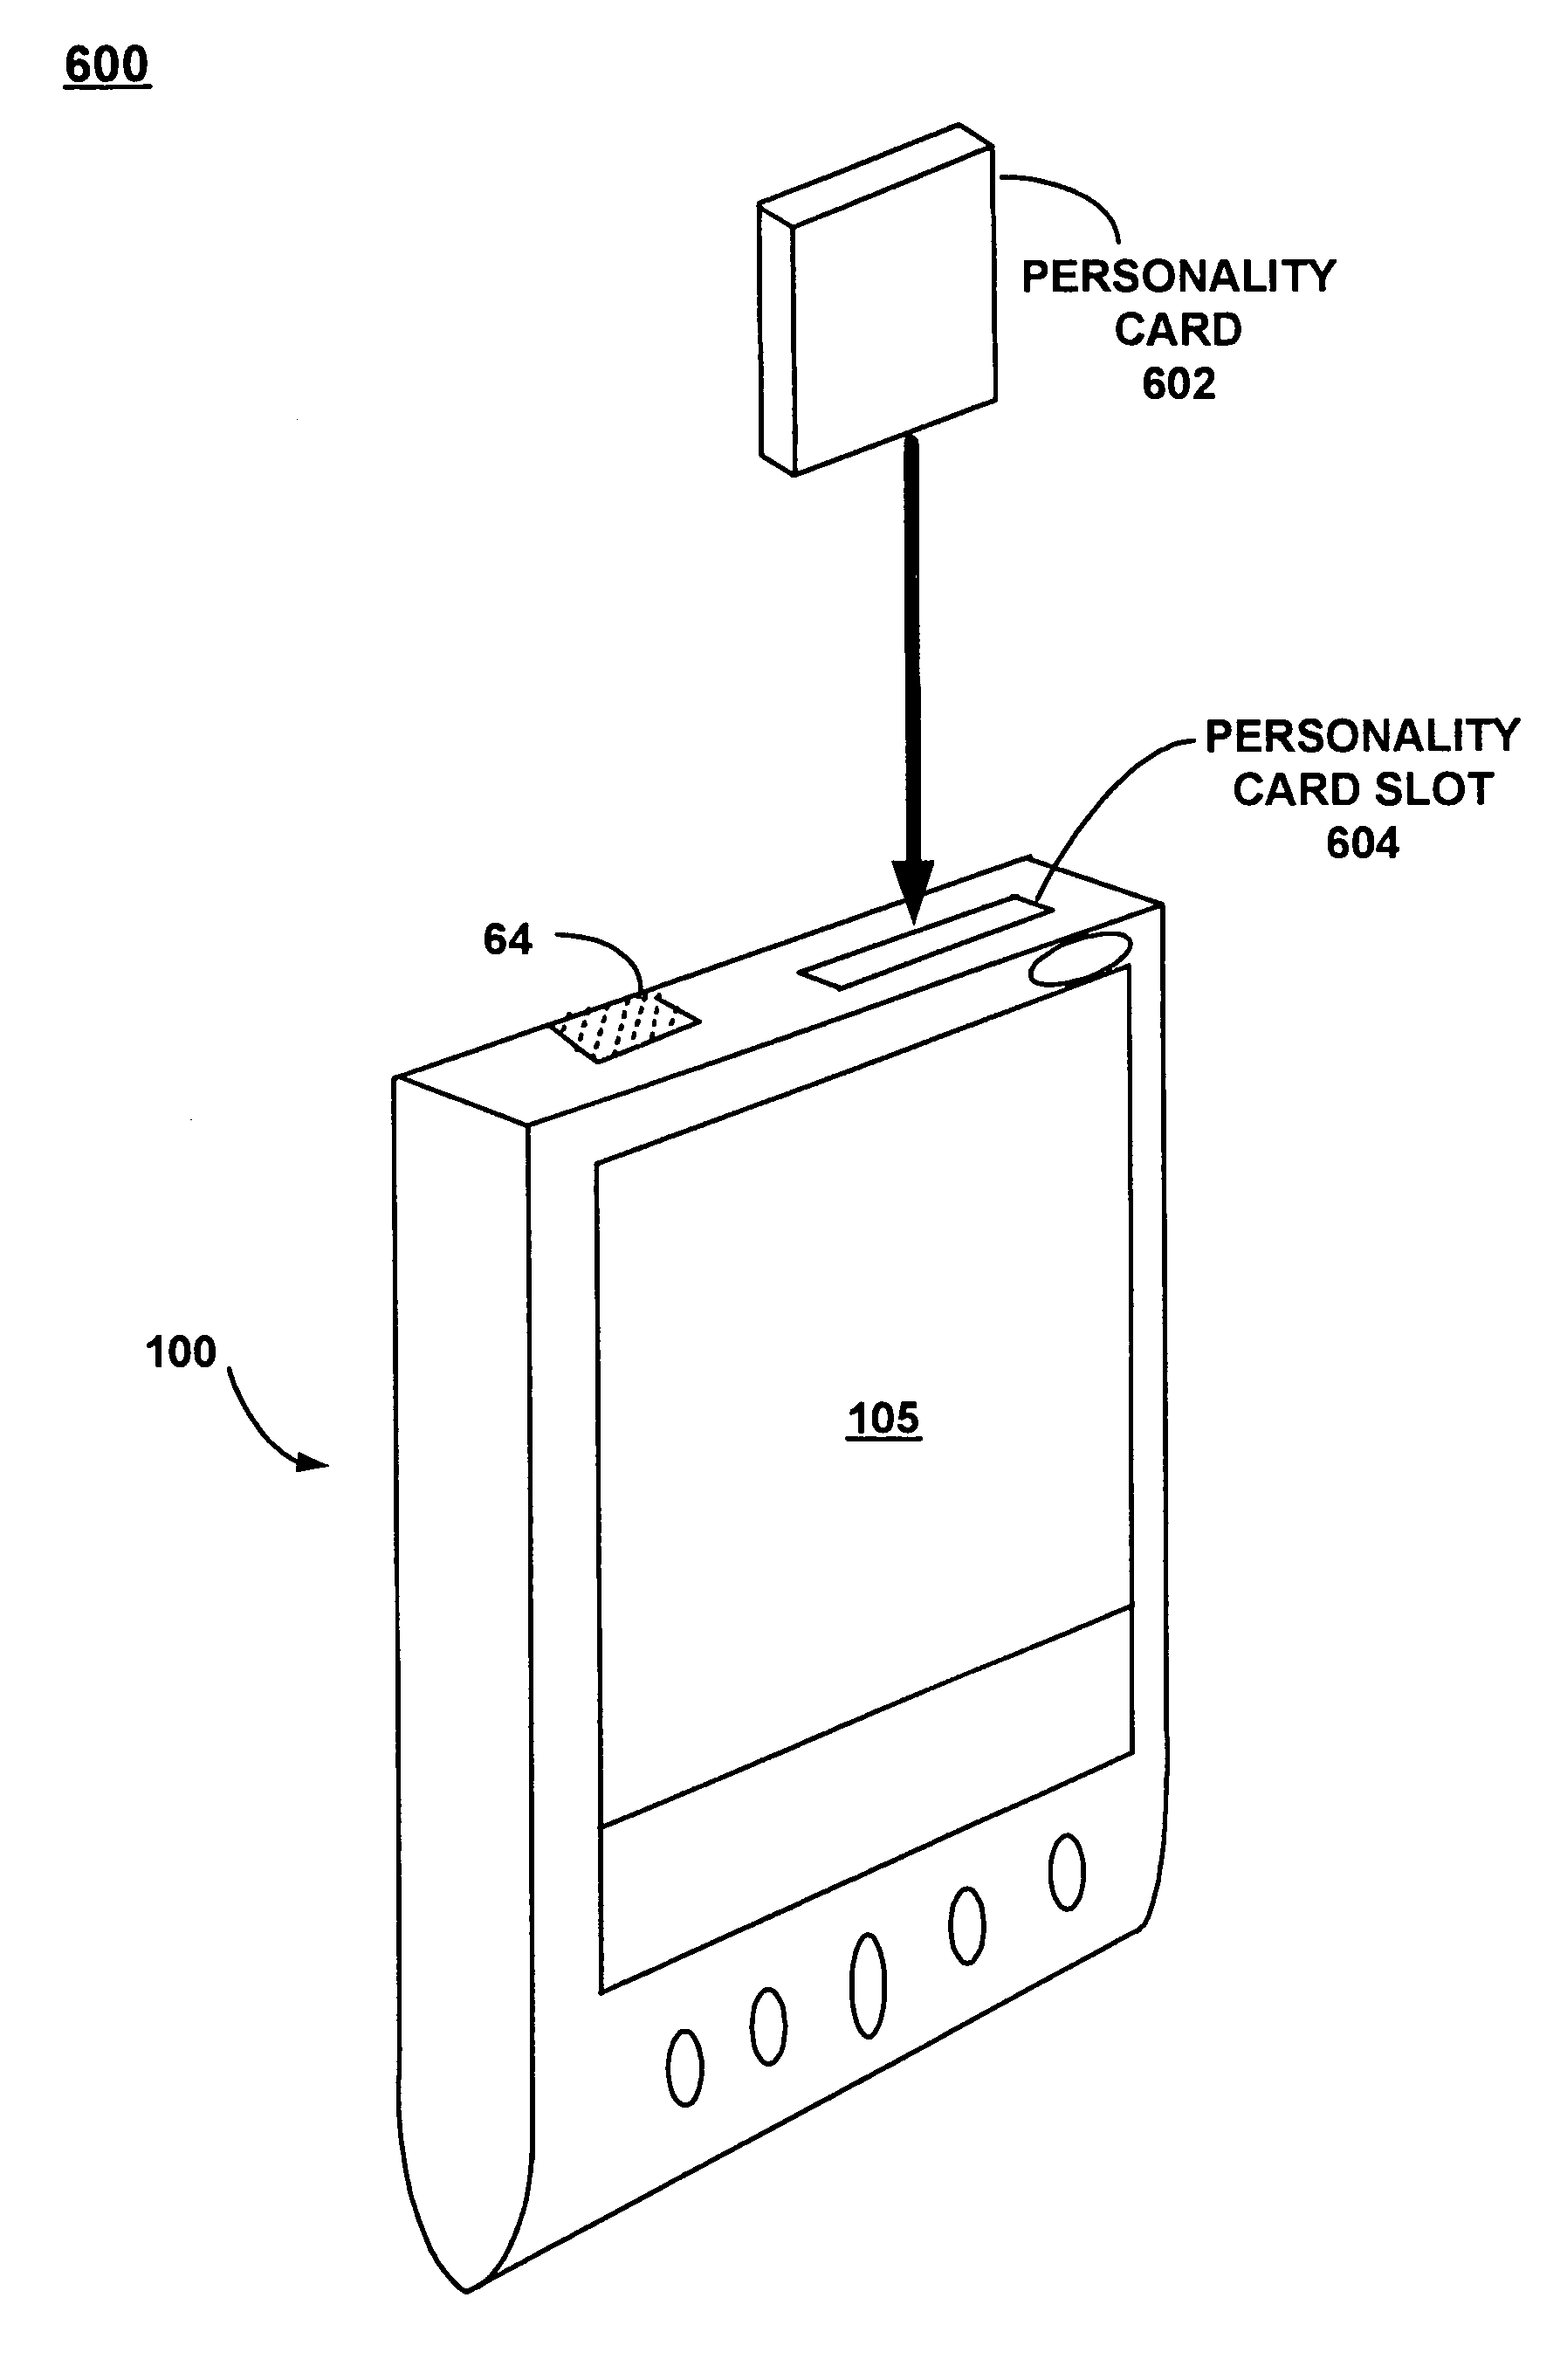 Method and system for enabling personal digital assistants and protecting stored private data